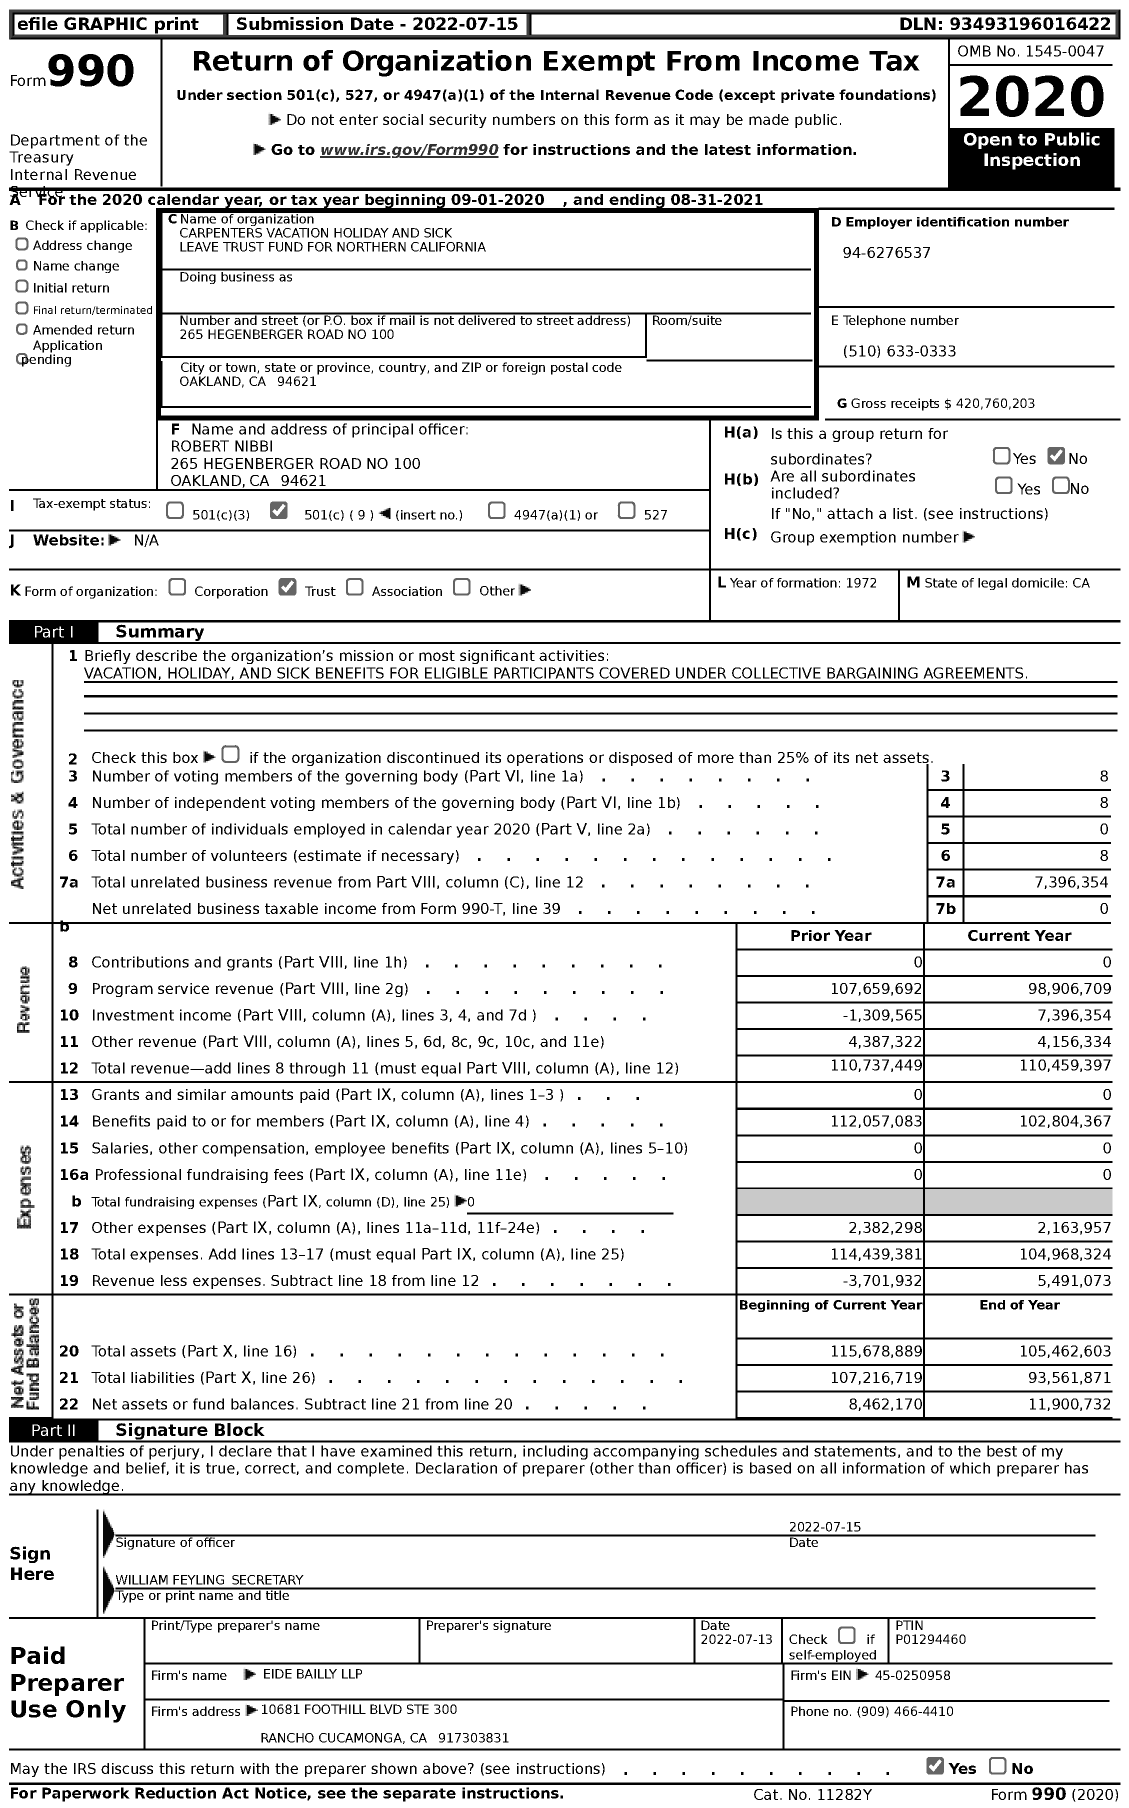 Image of first page of 2020 Form 990 for Carpenters Vacationholiday Holiday and Sick Leave Trust Fund for Northern California